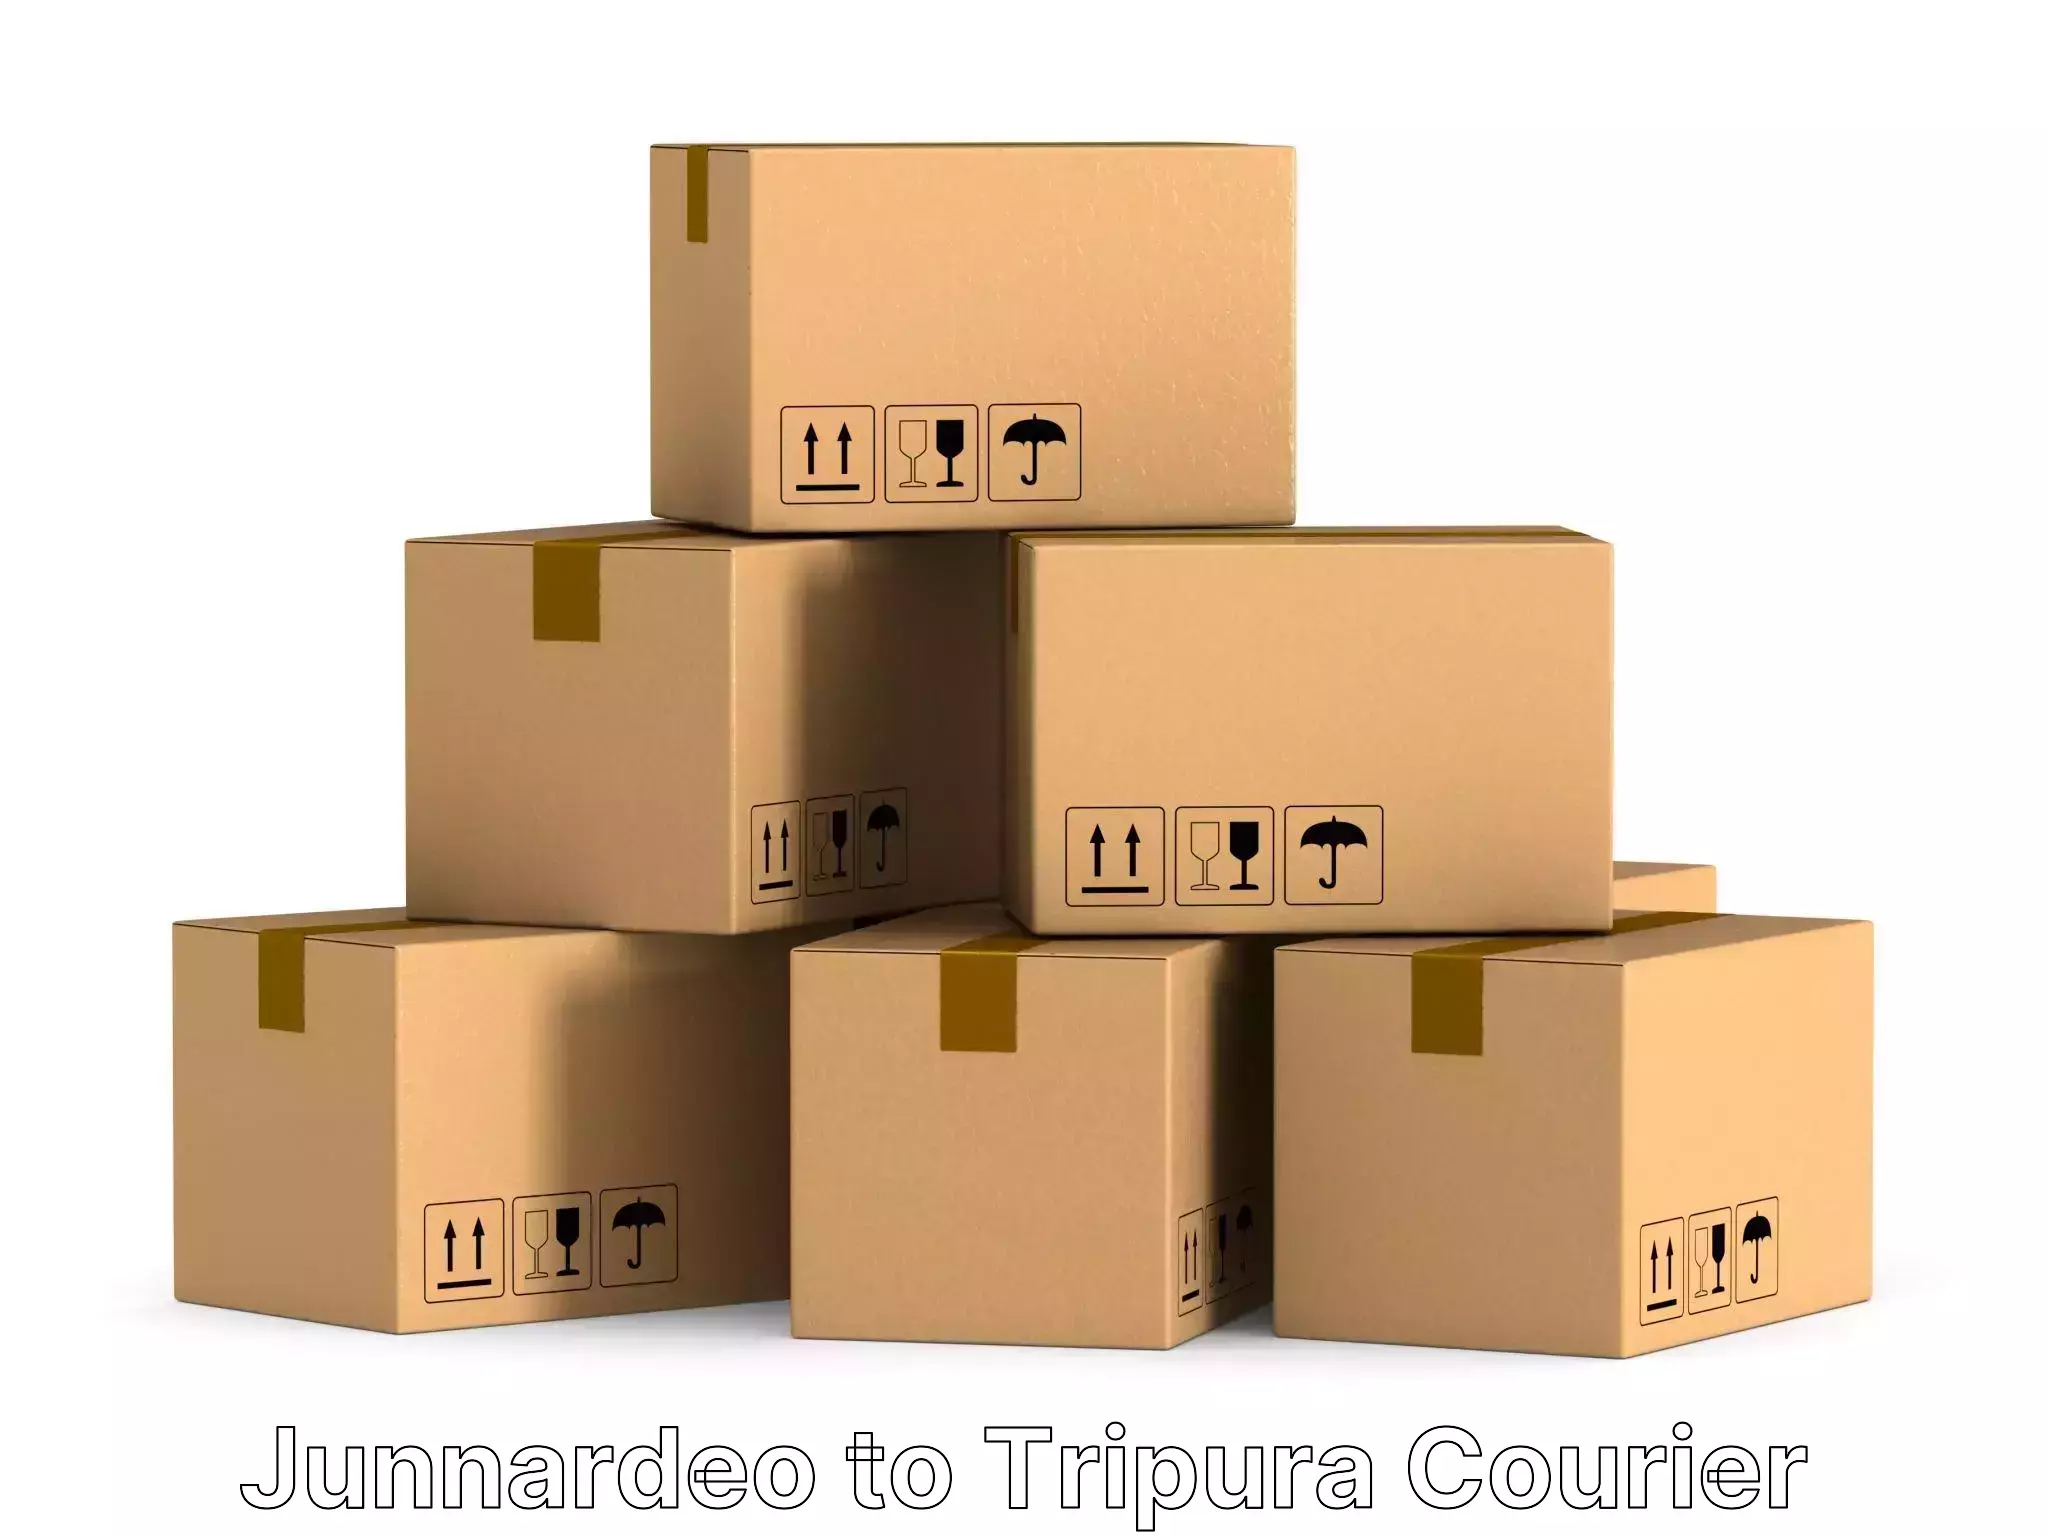 Furniture moving specialists Junnardeo to Manughat